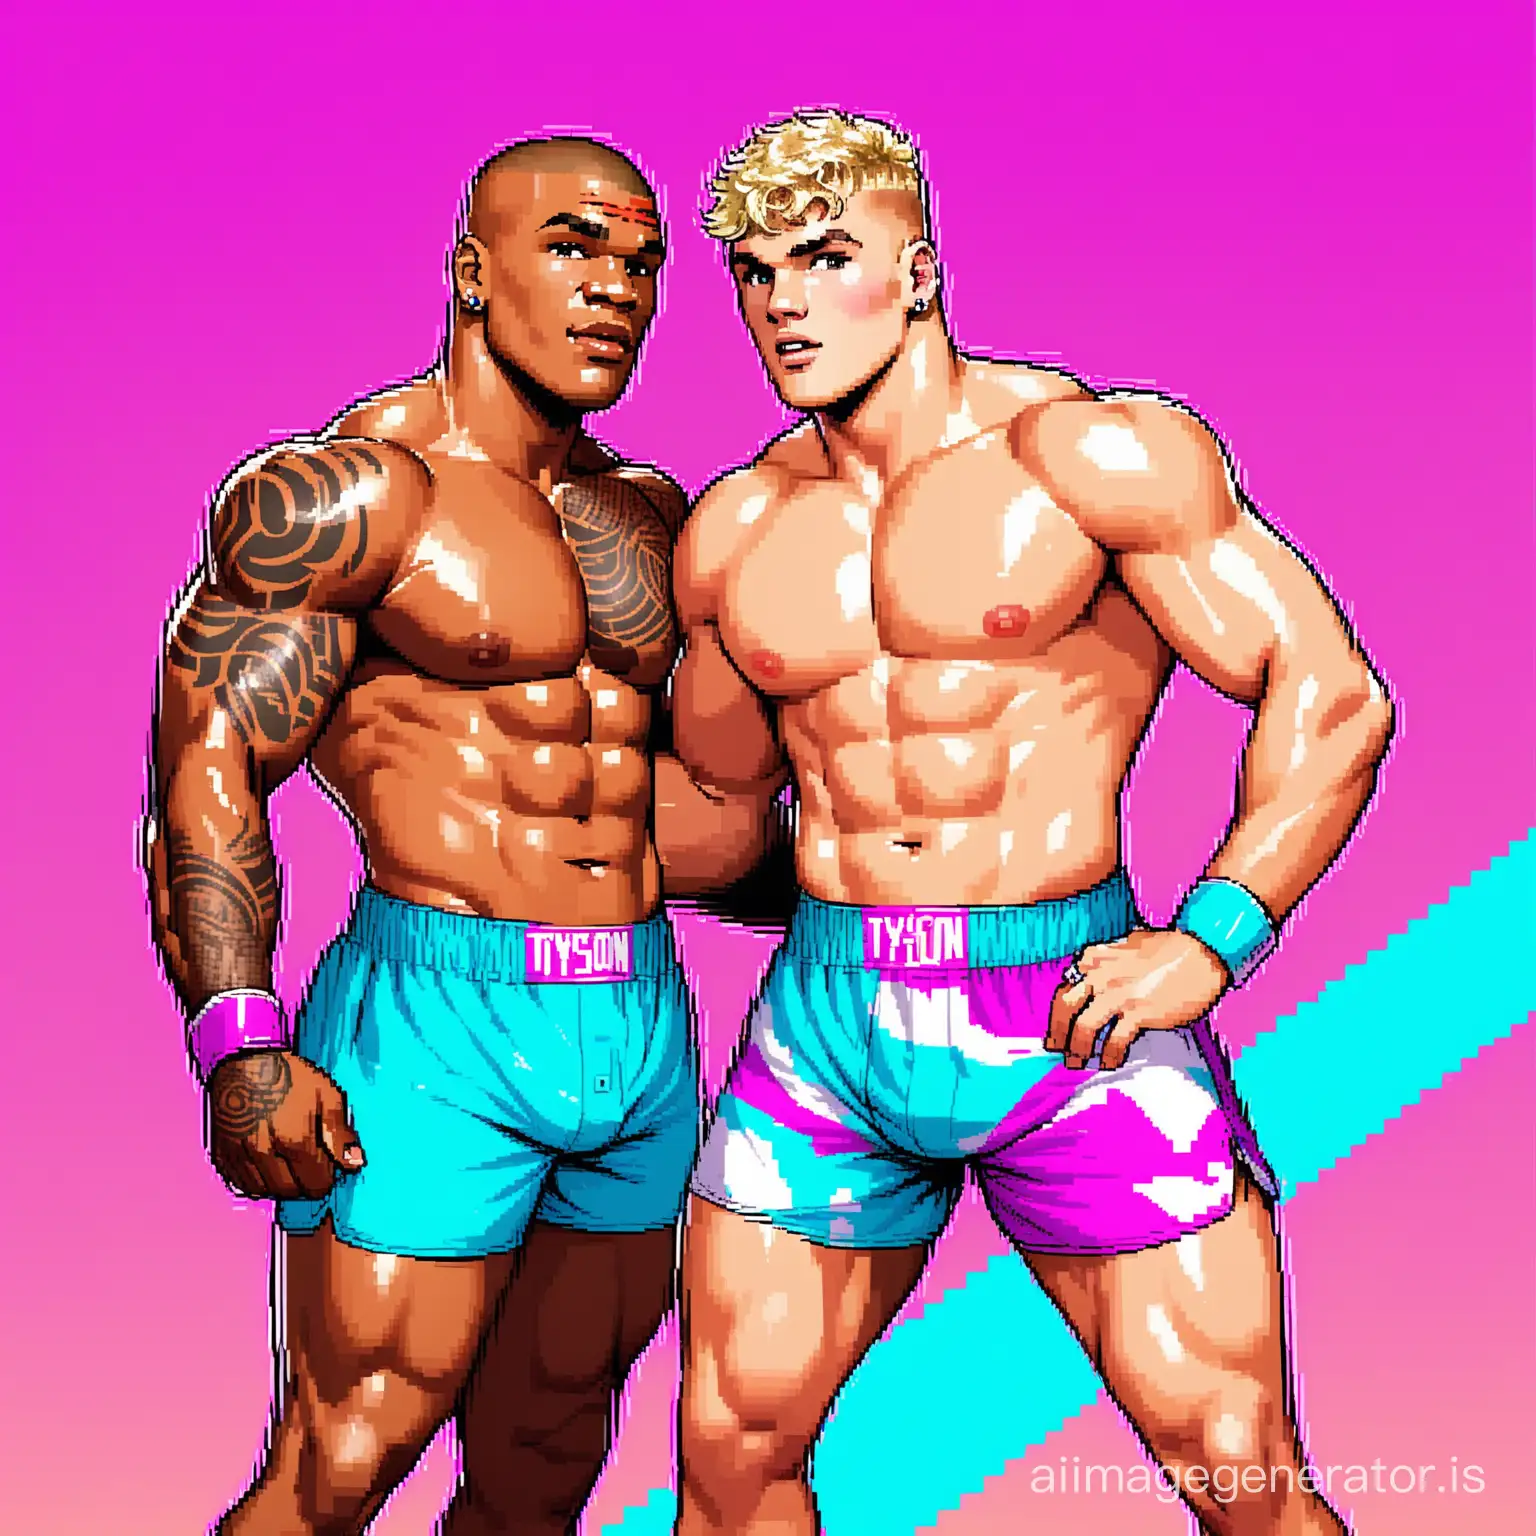 Retro-Gaming-Themed-Boxers-with-80s-Vaporwave-Aesthetic-and-Pop-Culture-Icons